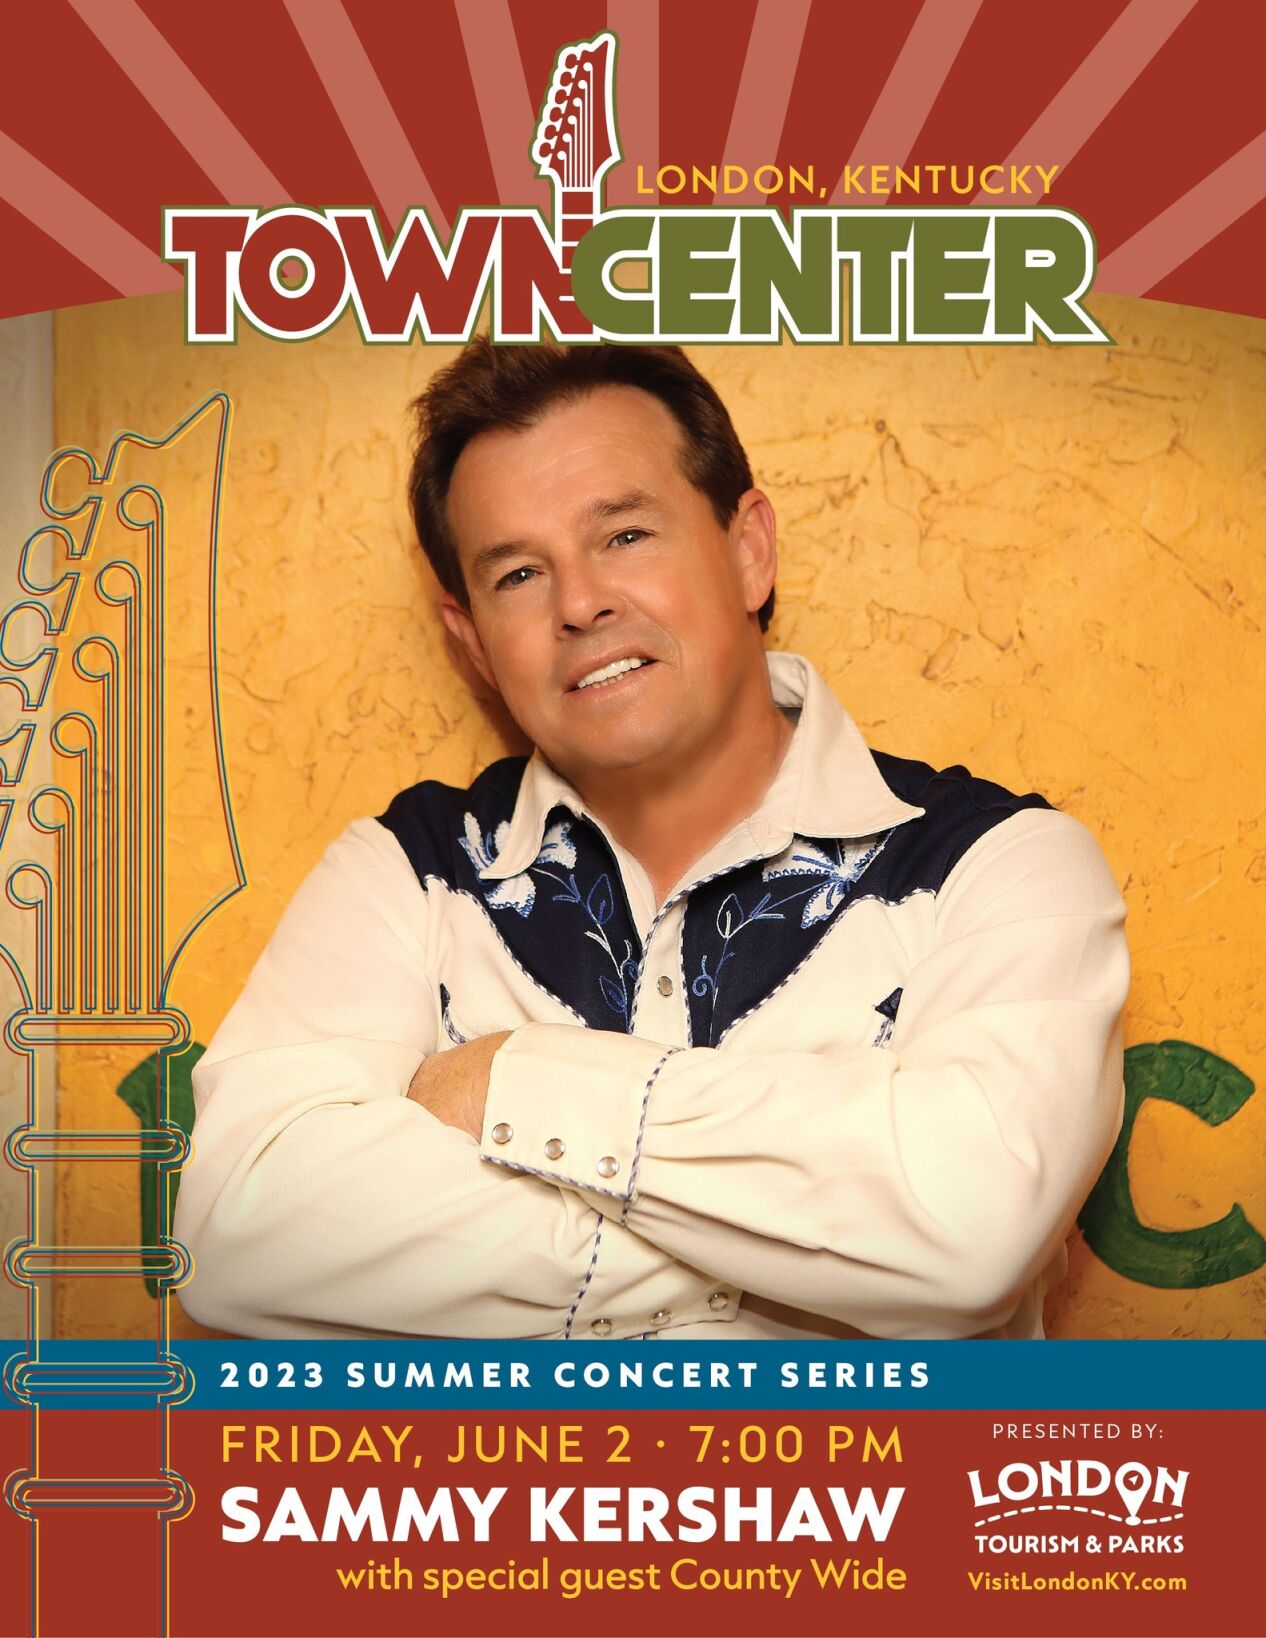 Sammy Kershaw to open 2023 Town Center Concert Series on Friday, June 2